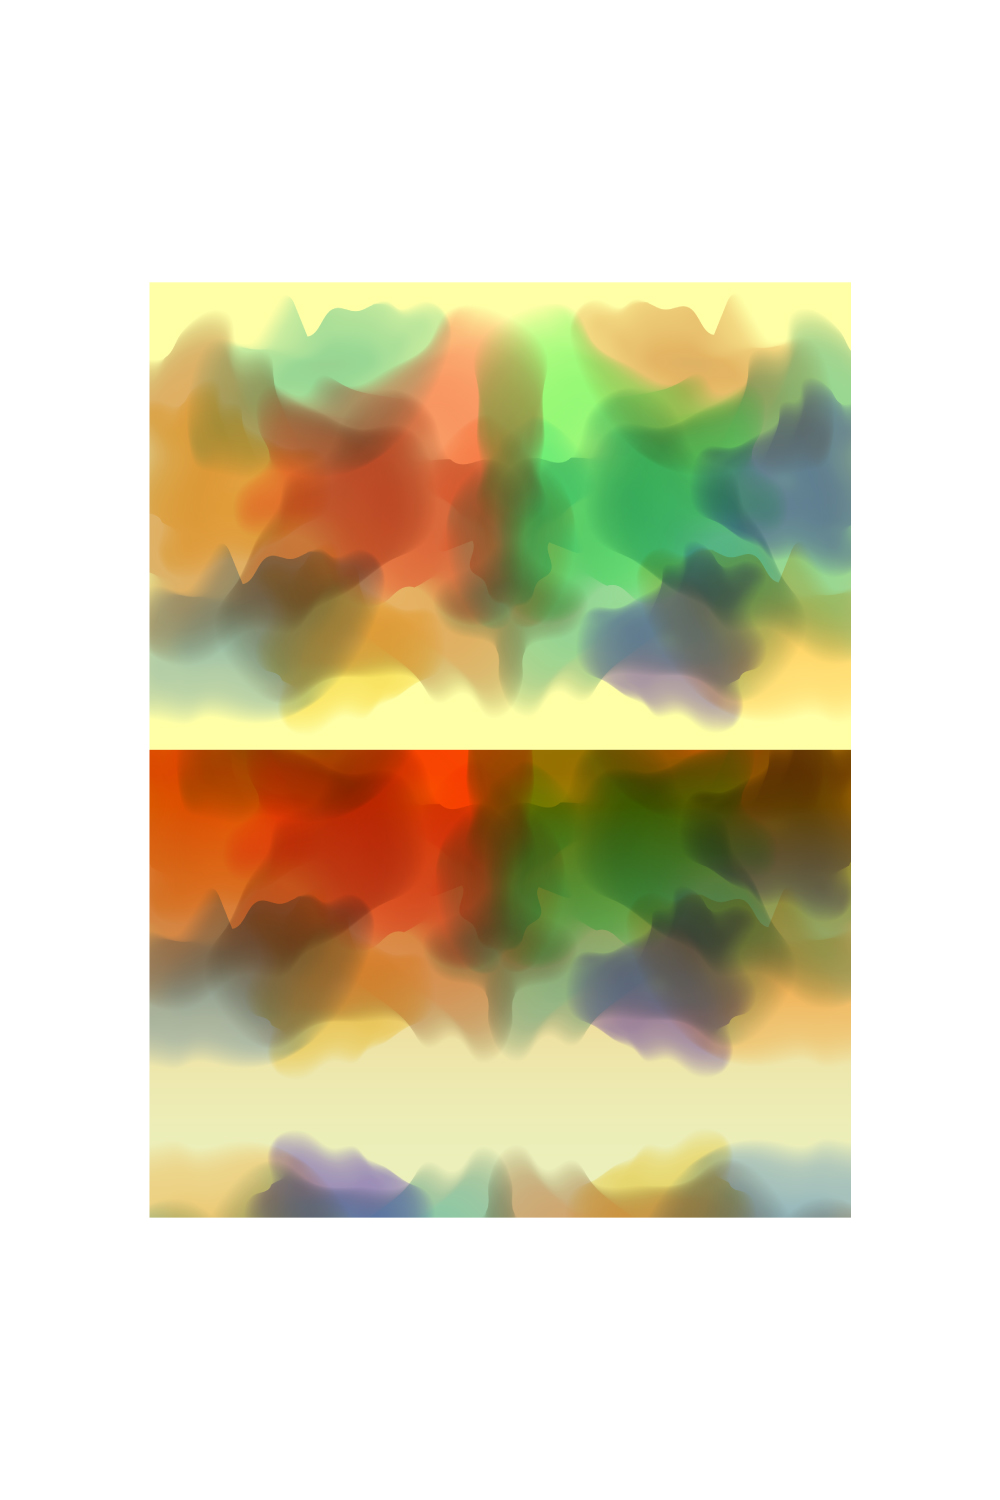 Blurry image of a multicolored background.